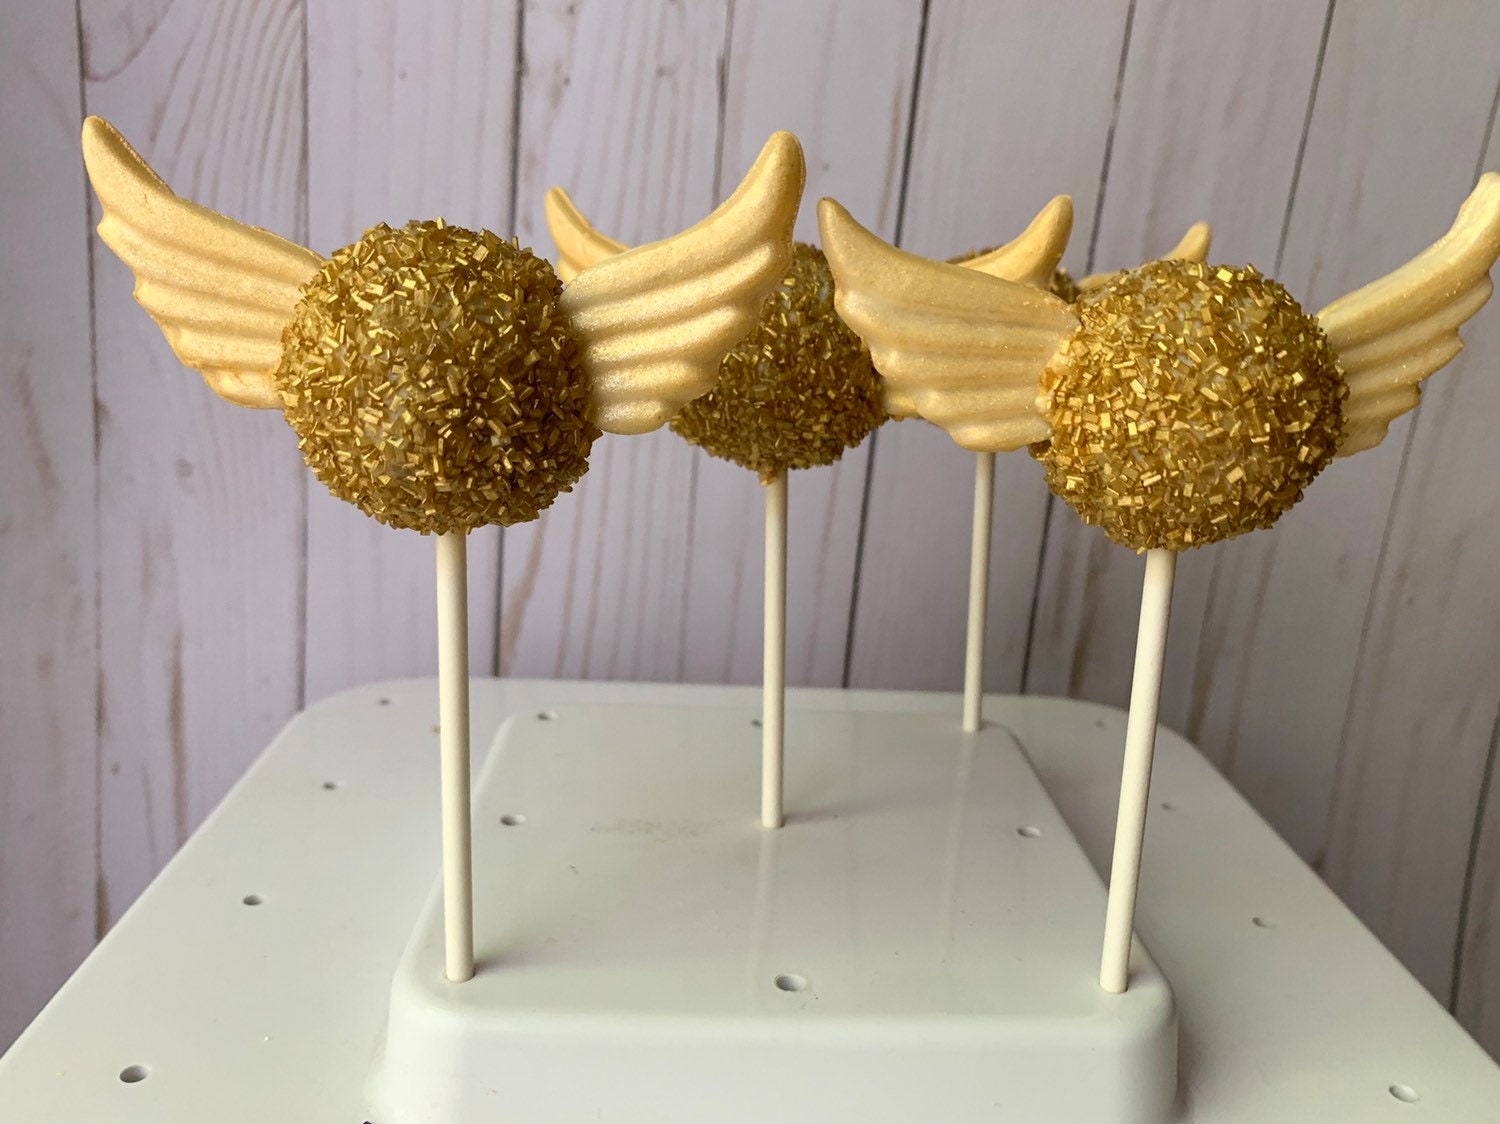 Buy Golden Snitch Harry Potter Themed Cake Pops Online in India 